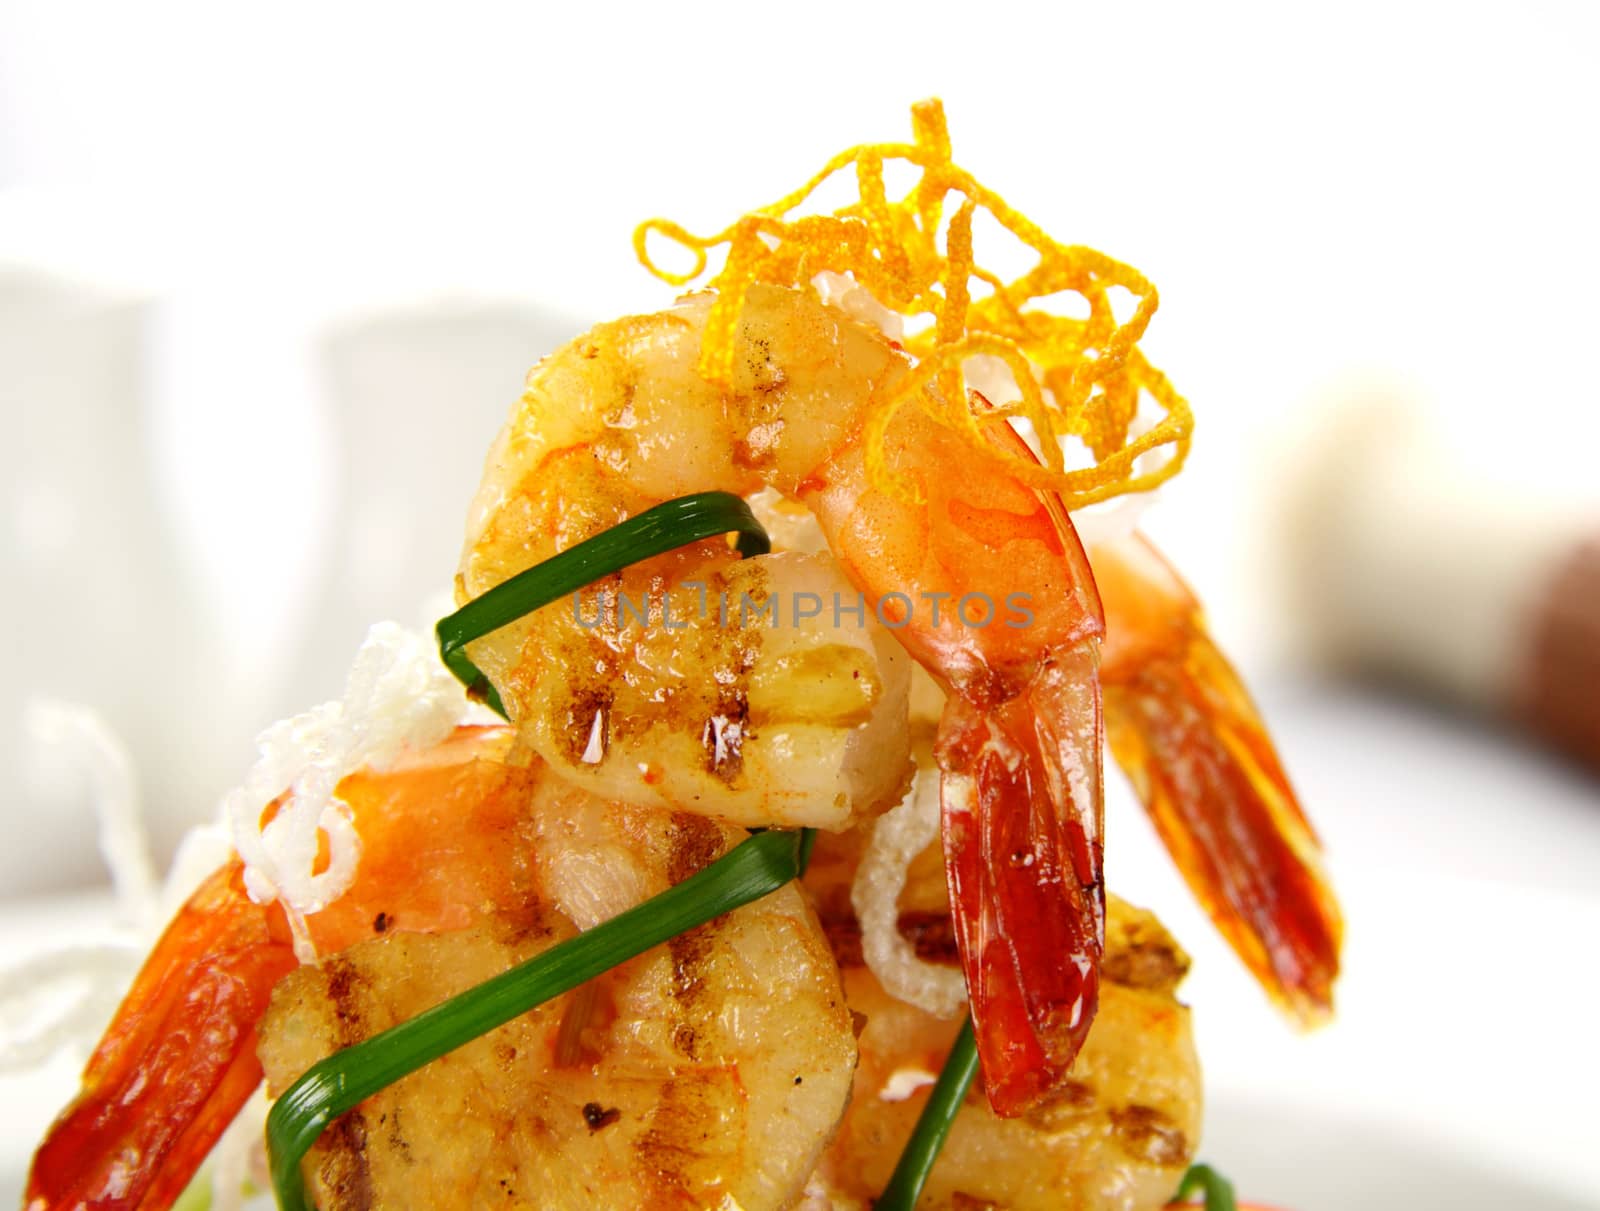 Stack of chargrilled shrimps tied up with chives.